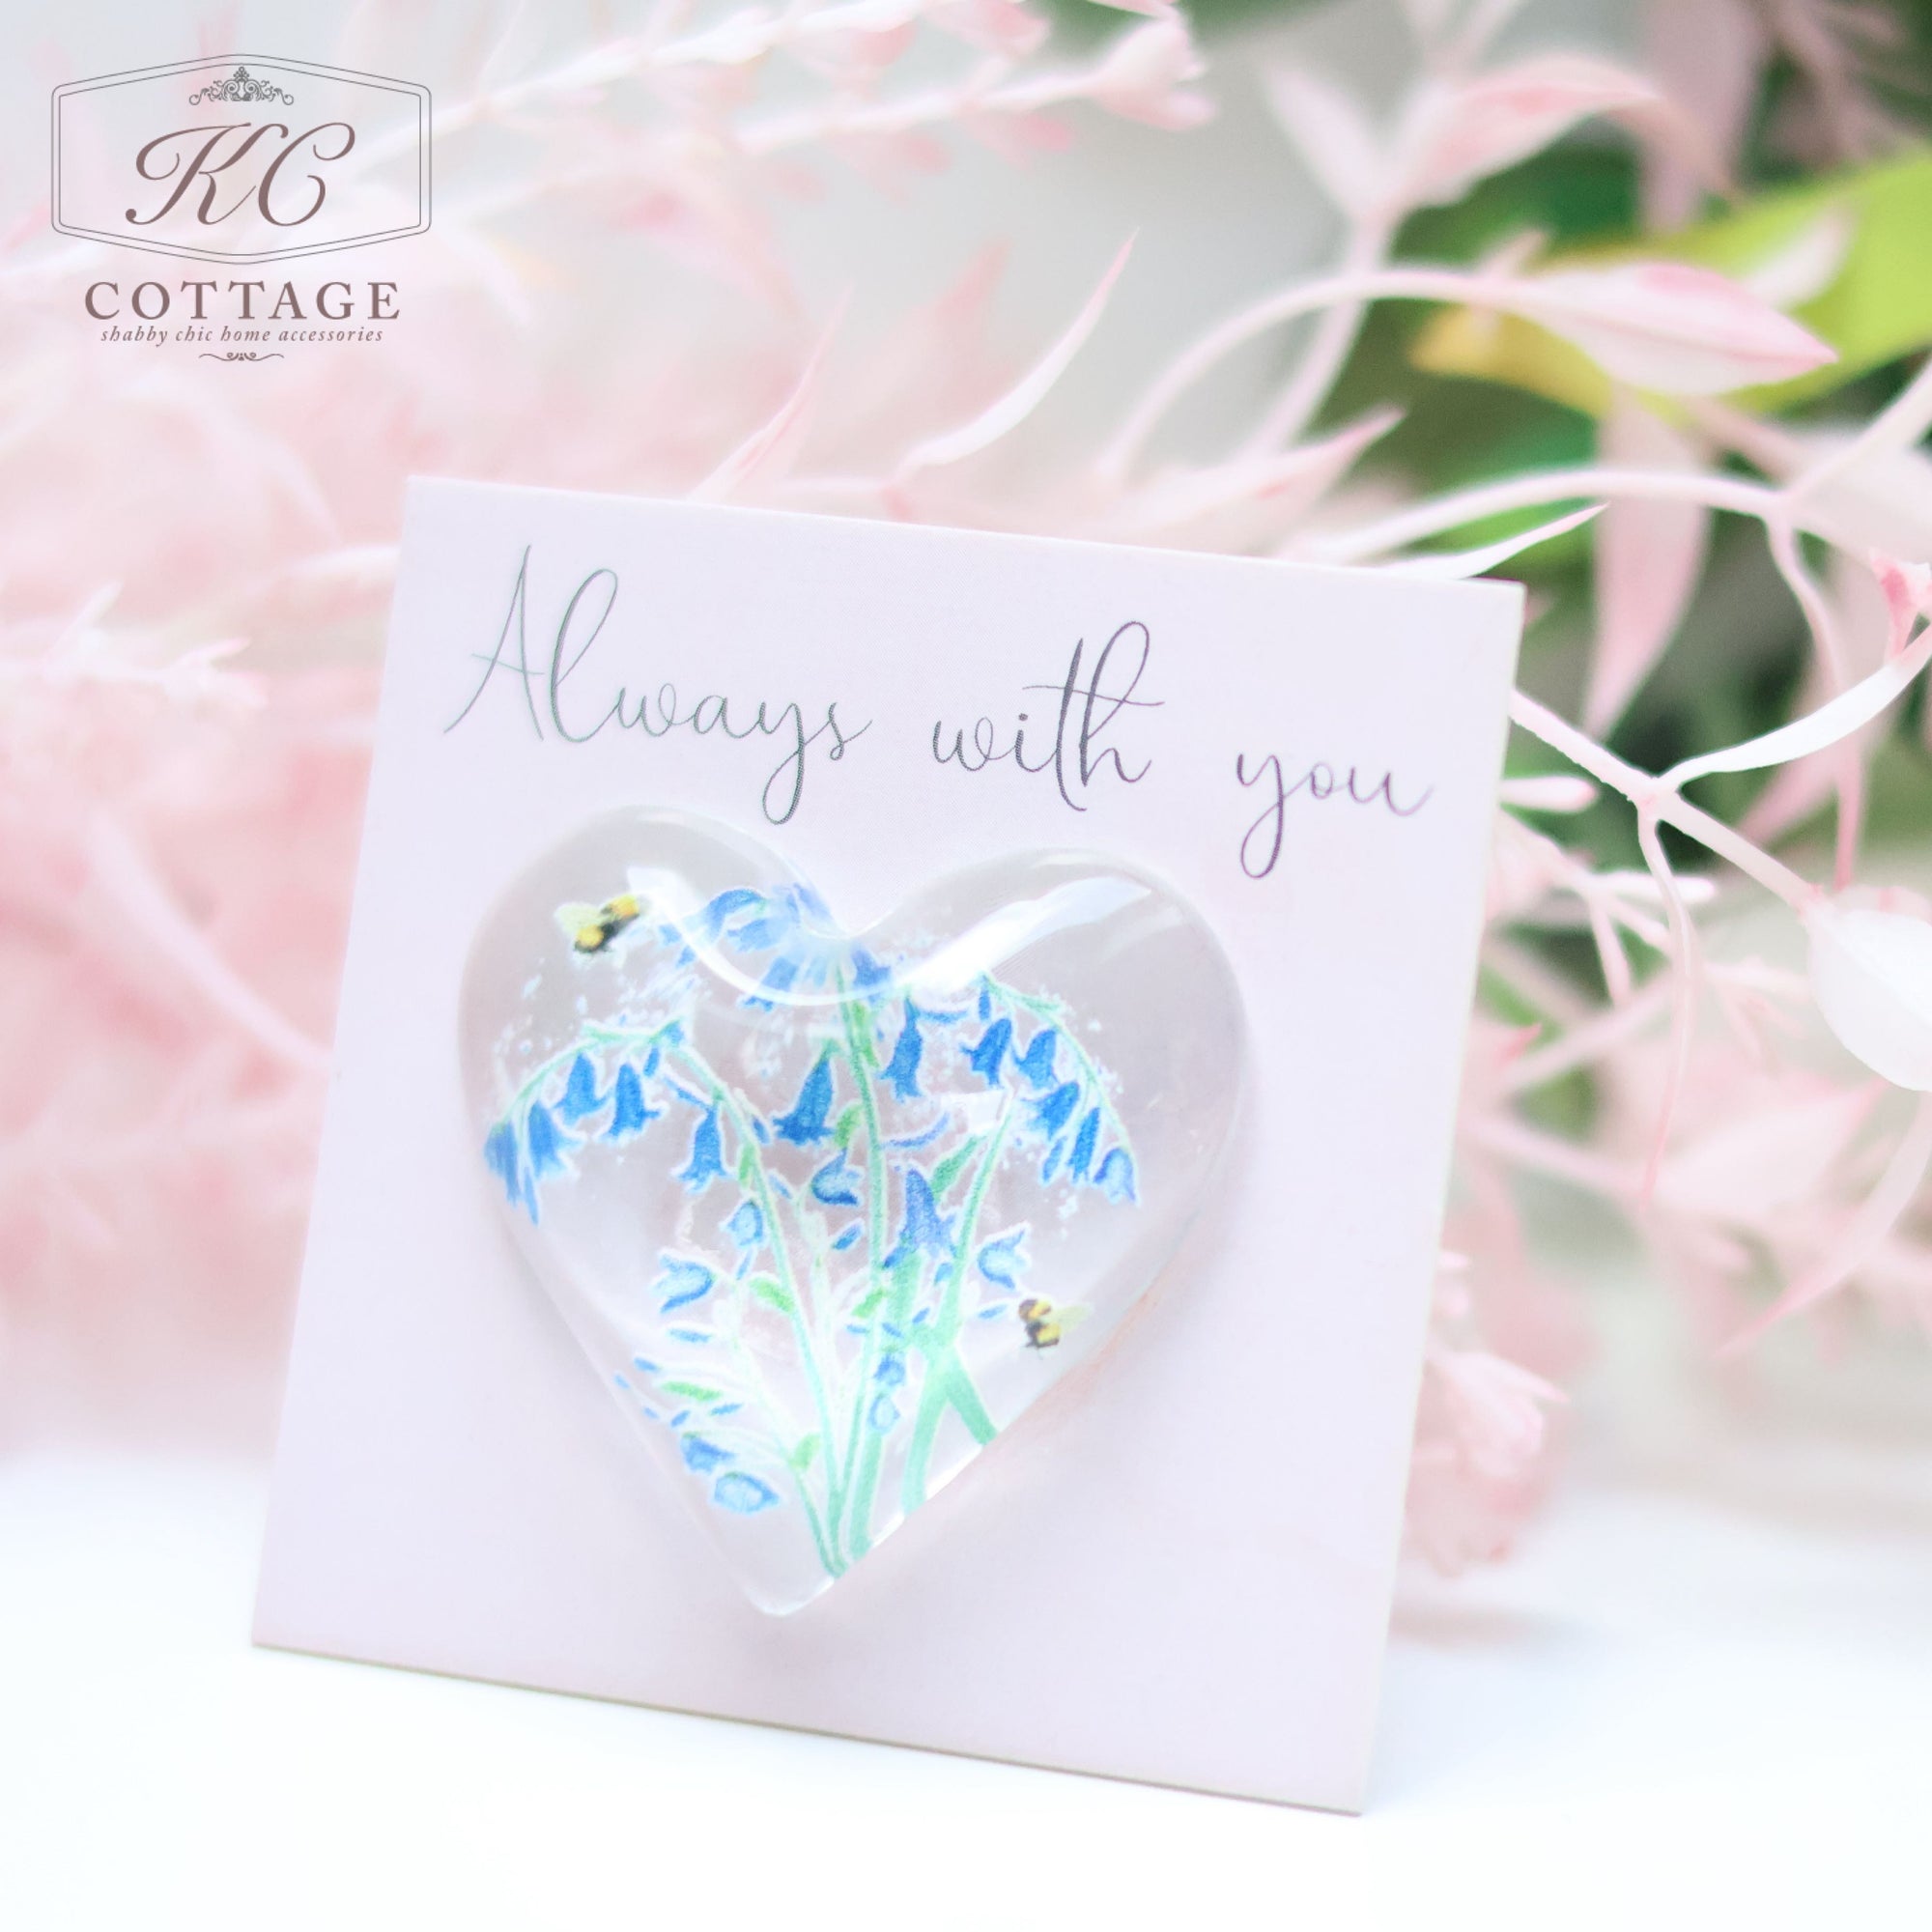 Glass Spring Floral Heart with Sentiment Card